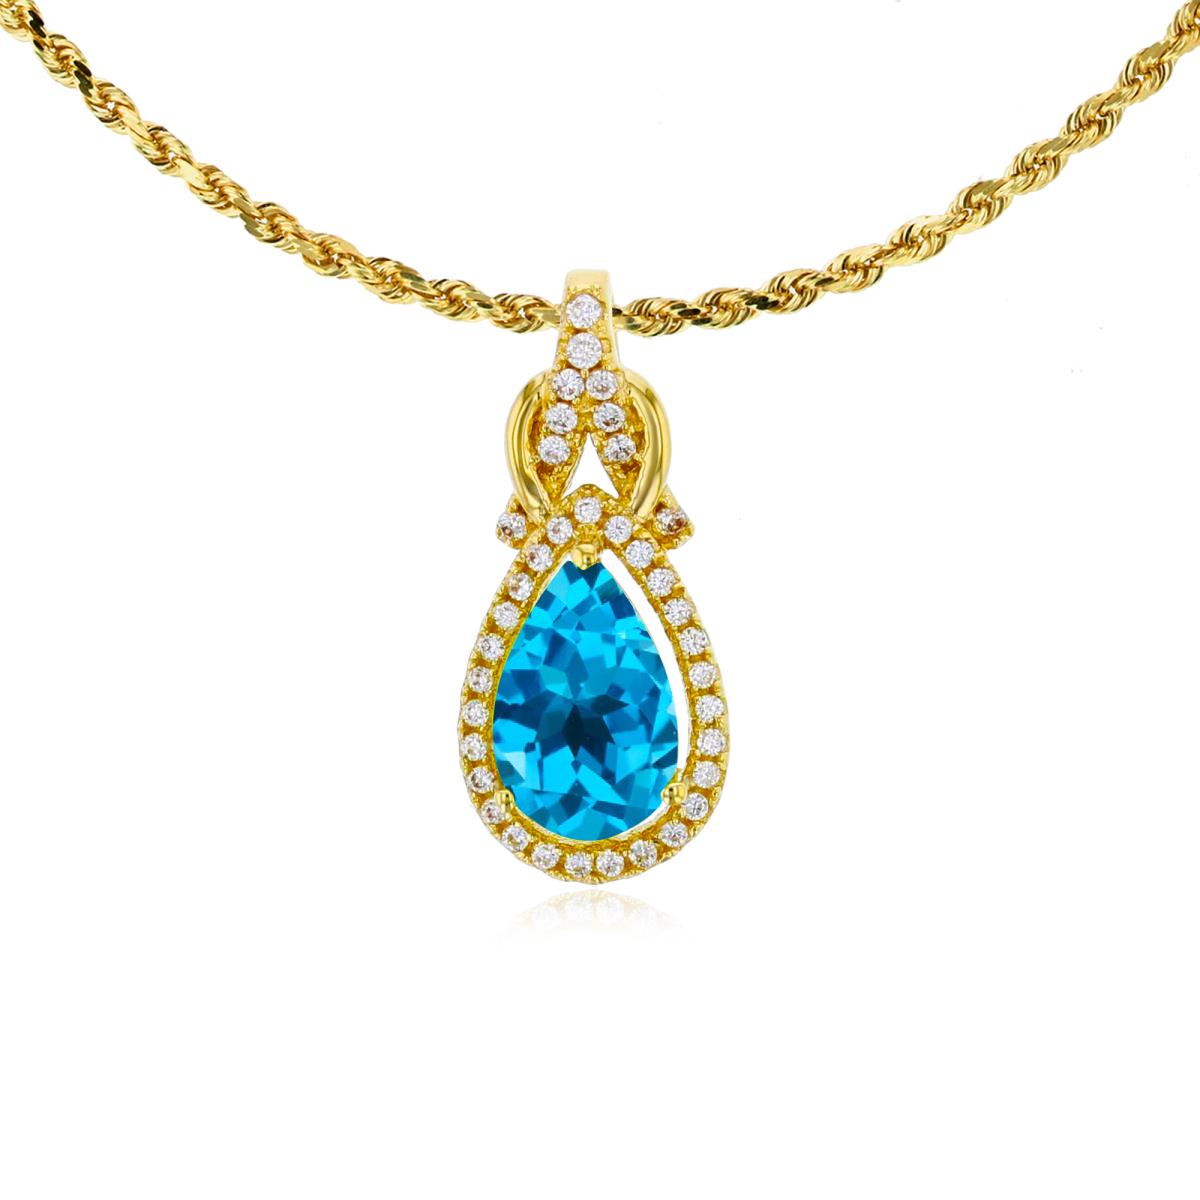 14K Yellow Gold 8x5mm Pear Cut Swiss Blue Topaz & 0.11 CTTW Rnd Diamond Knot 18" Rope Chain Necklace